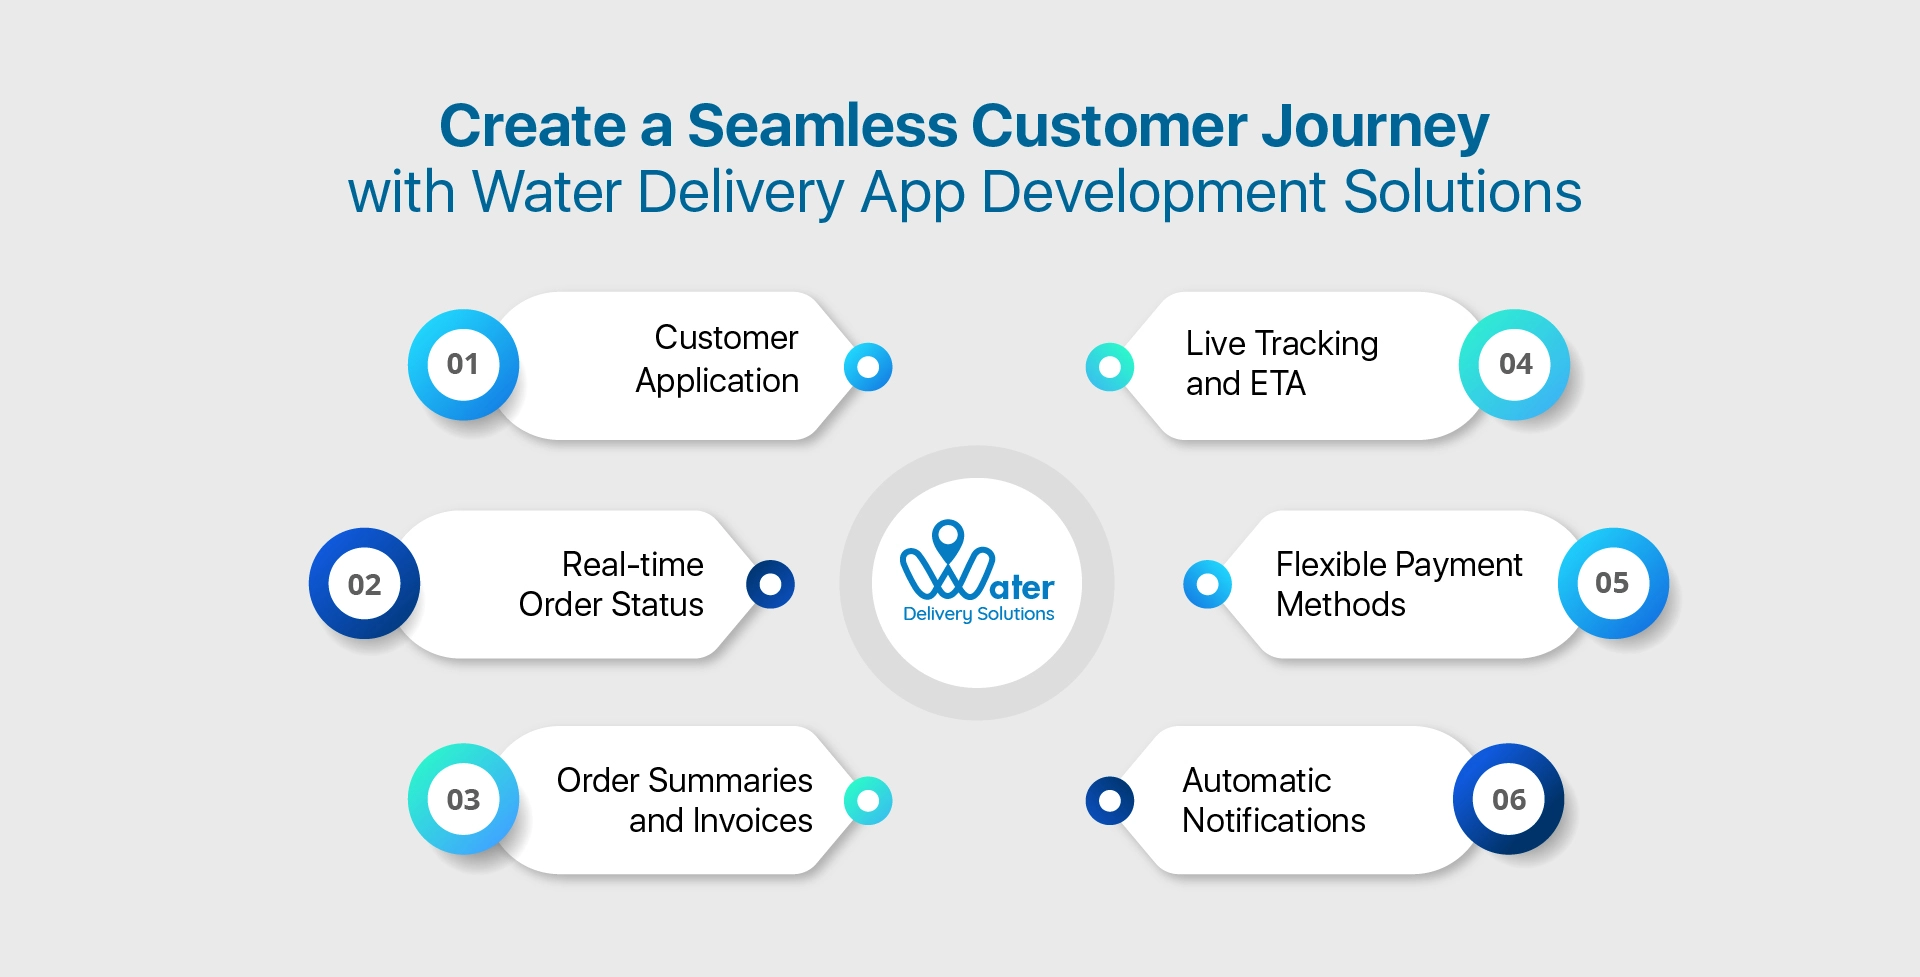 ravi garg, wds, seamless, customer journey, app, software, app development, customer app, order status, updates, order summaries, invoices, tracking, live tracking, payments, notifications